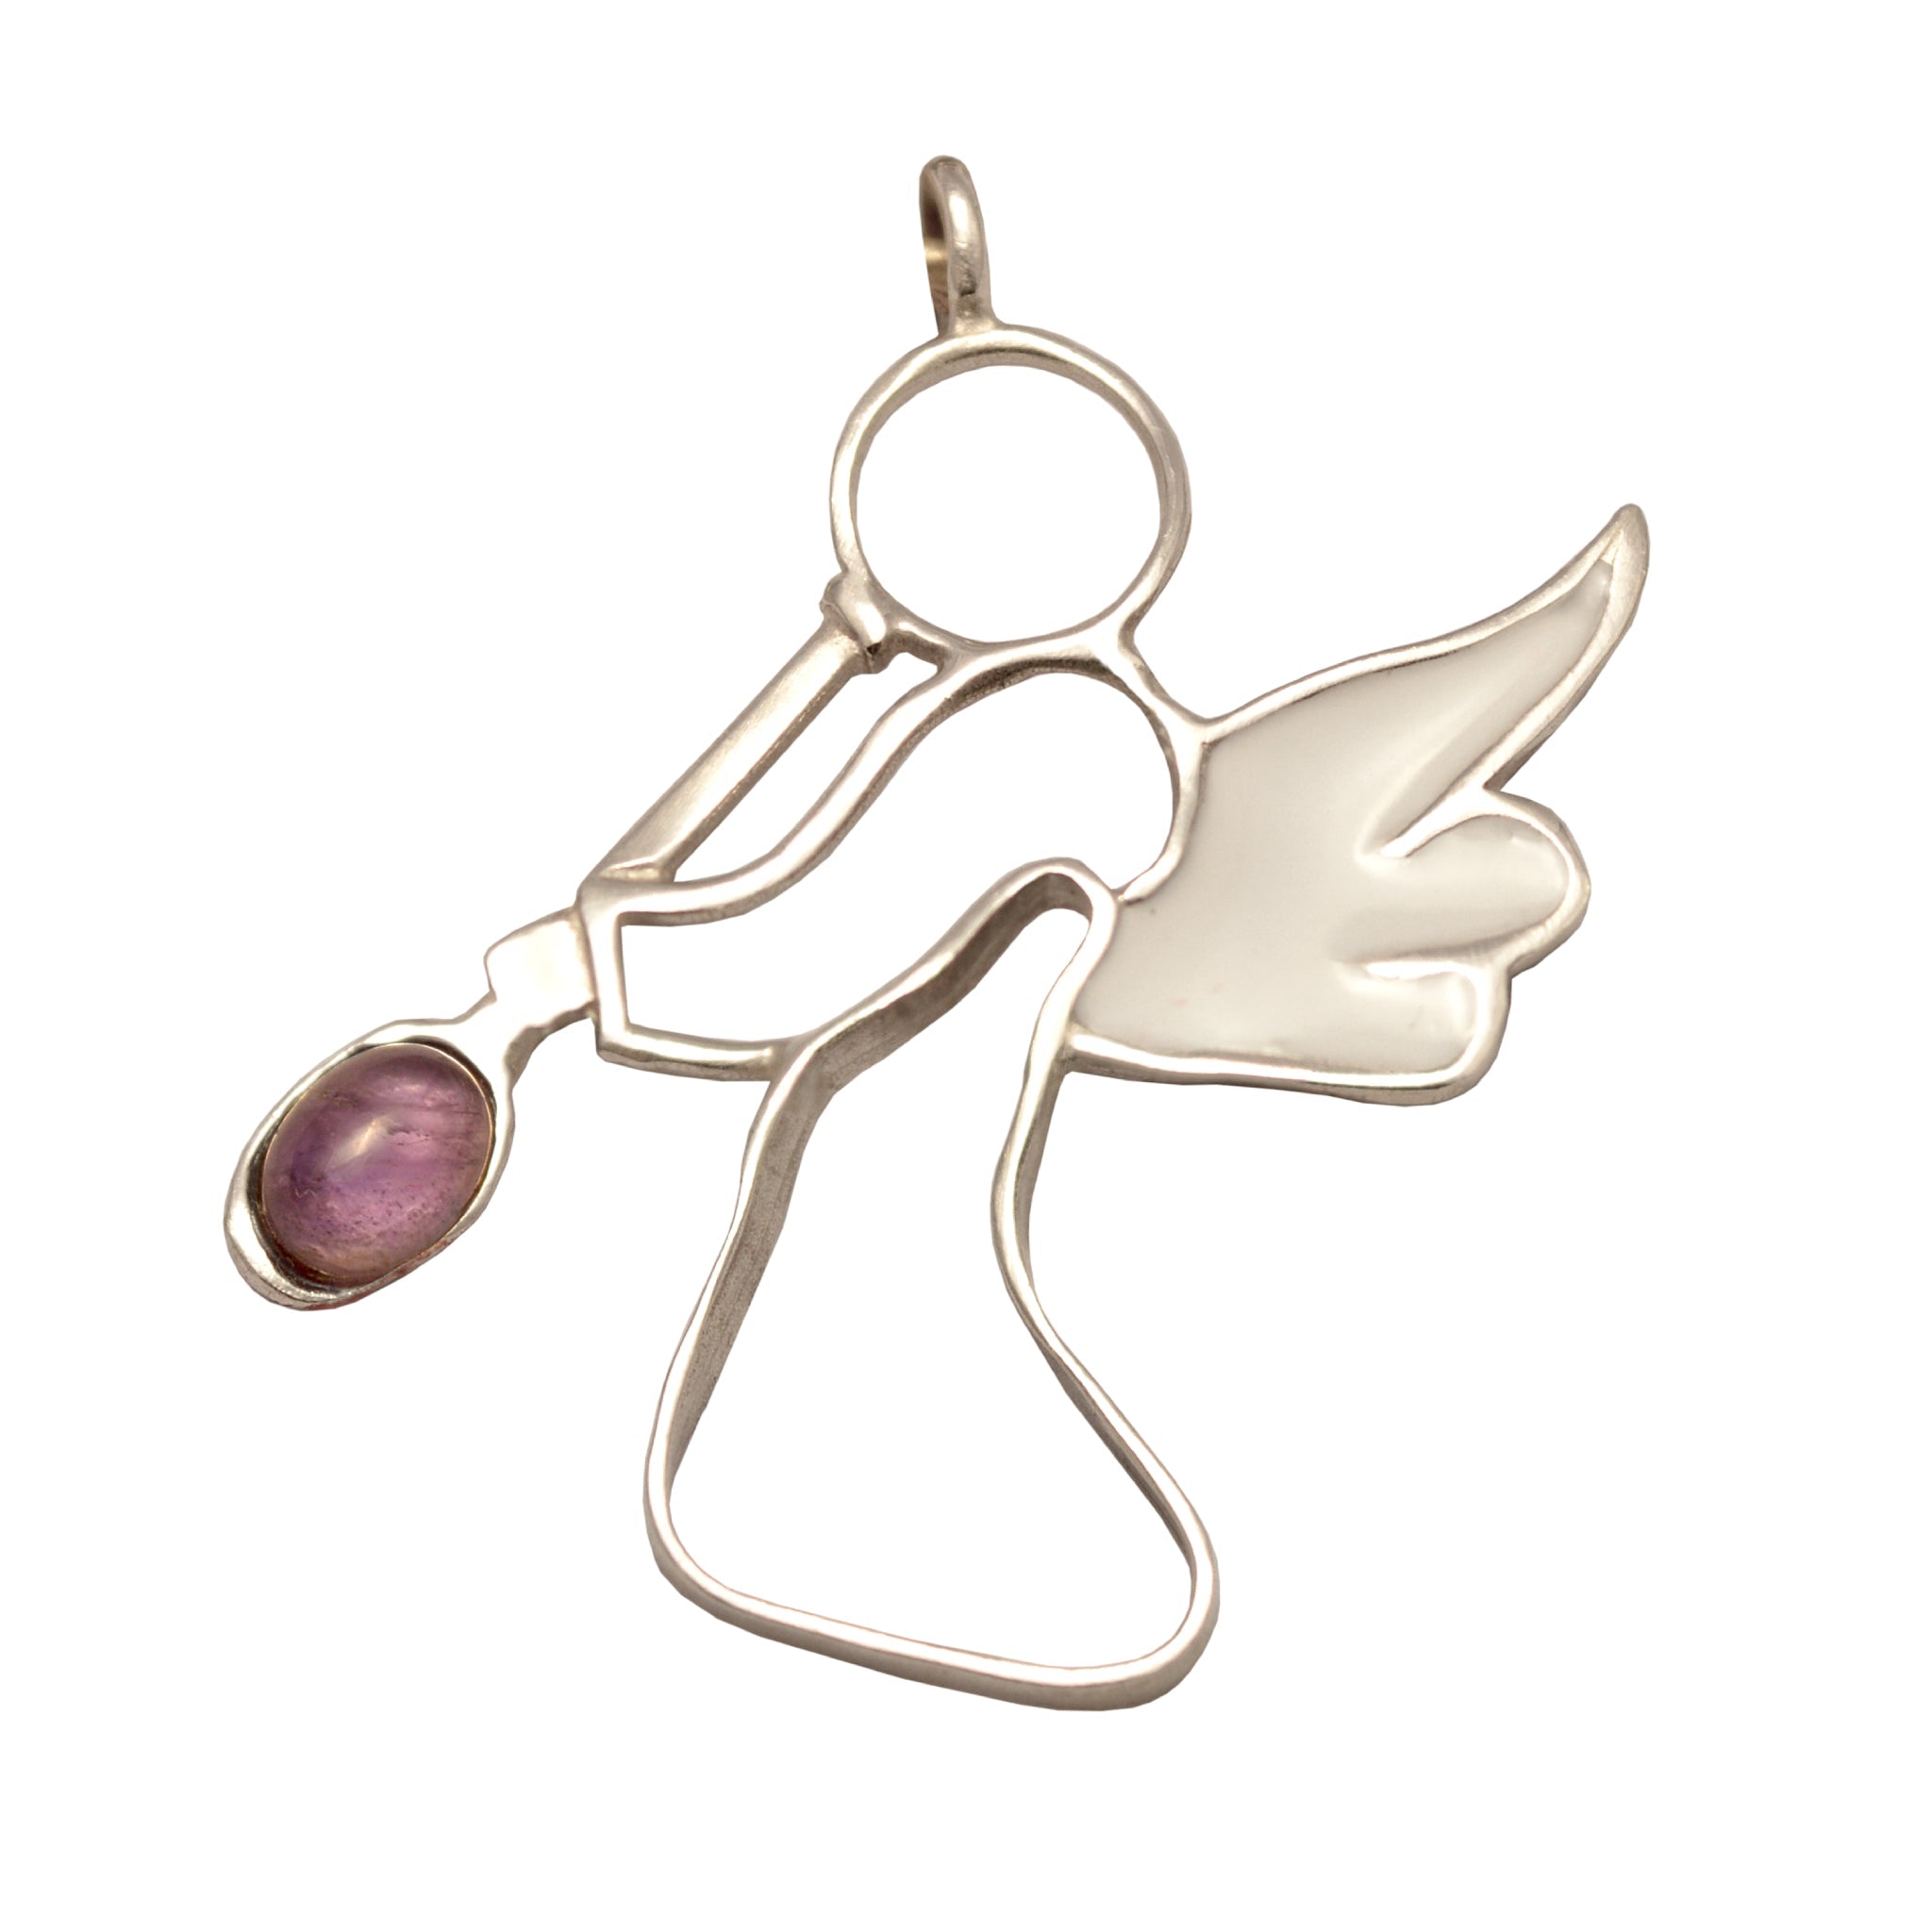 Angel Charm on plexiglass, silver charm with bronze leaves, home decor, gift idea, charm favor (PX-13)